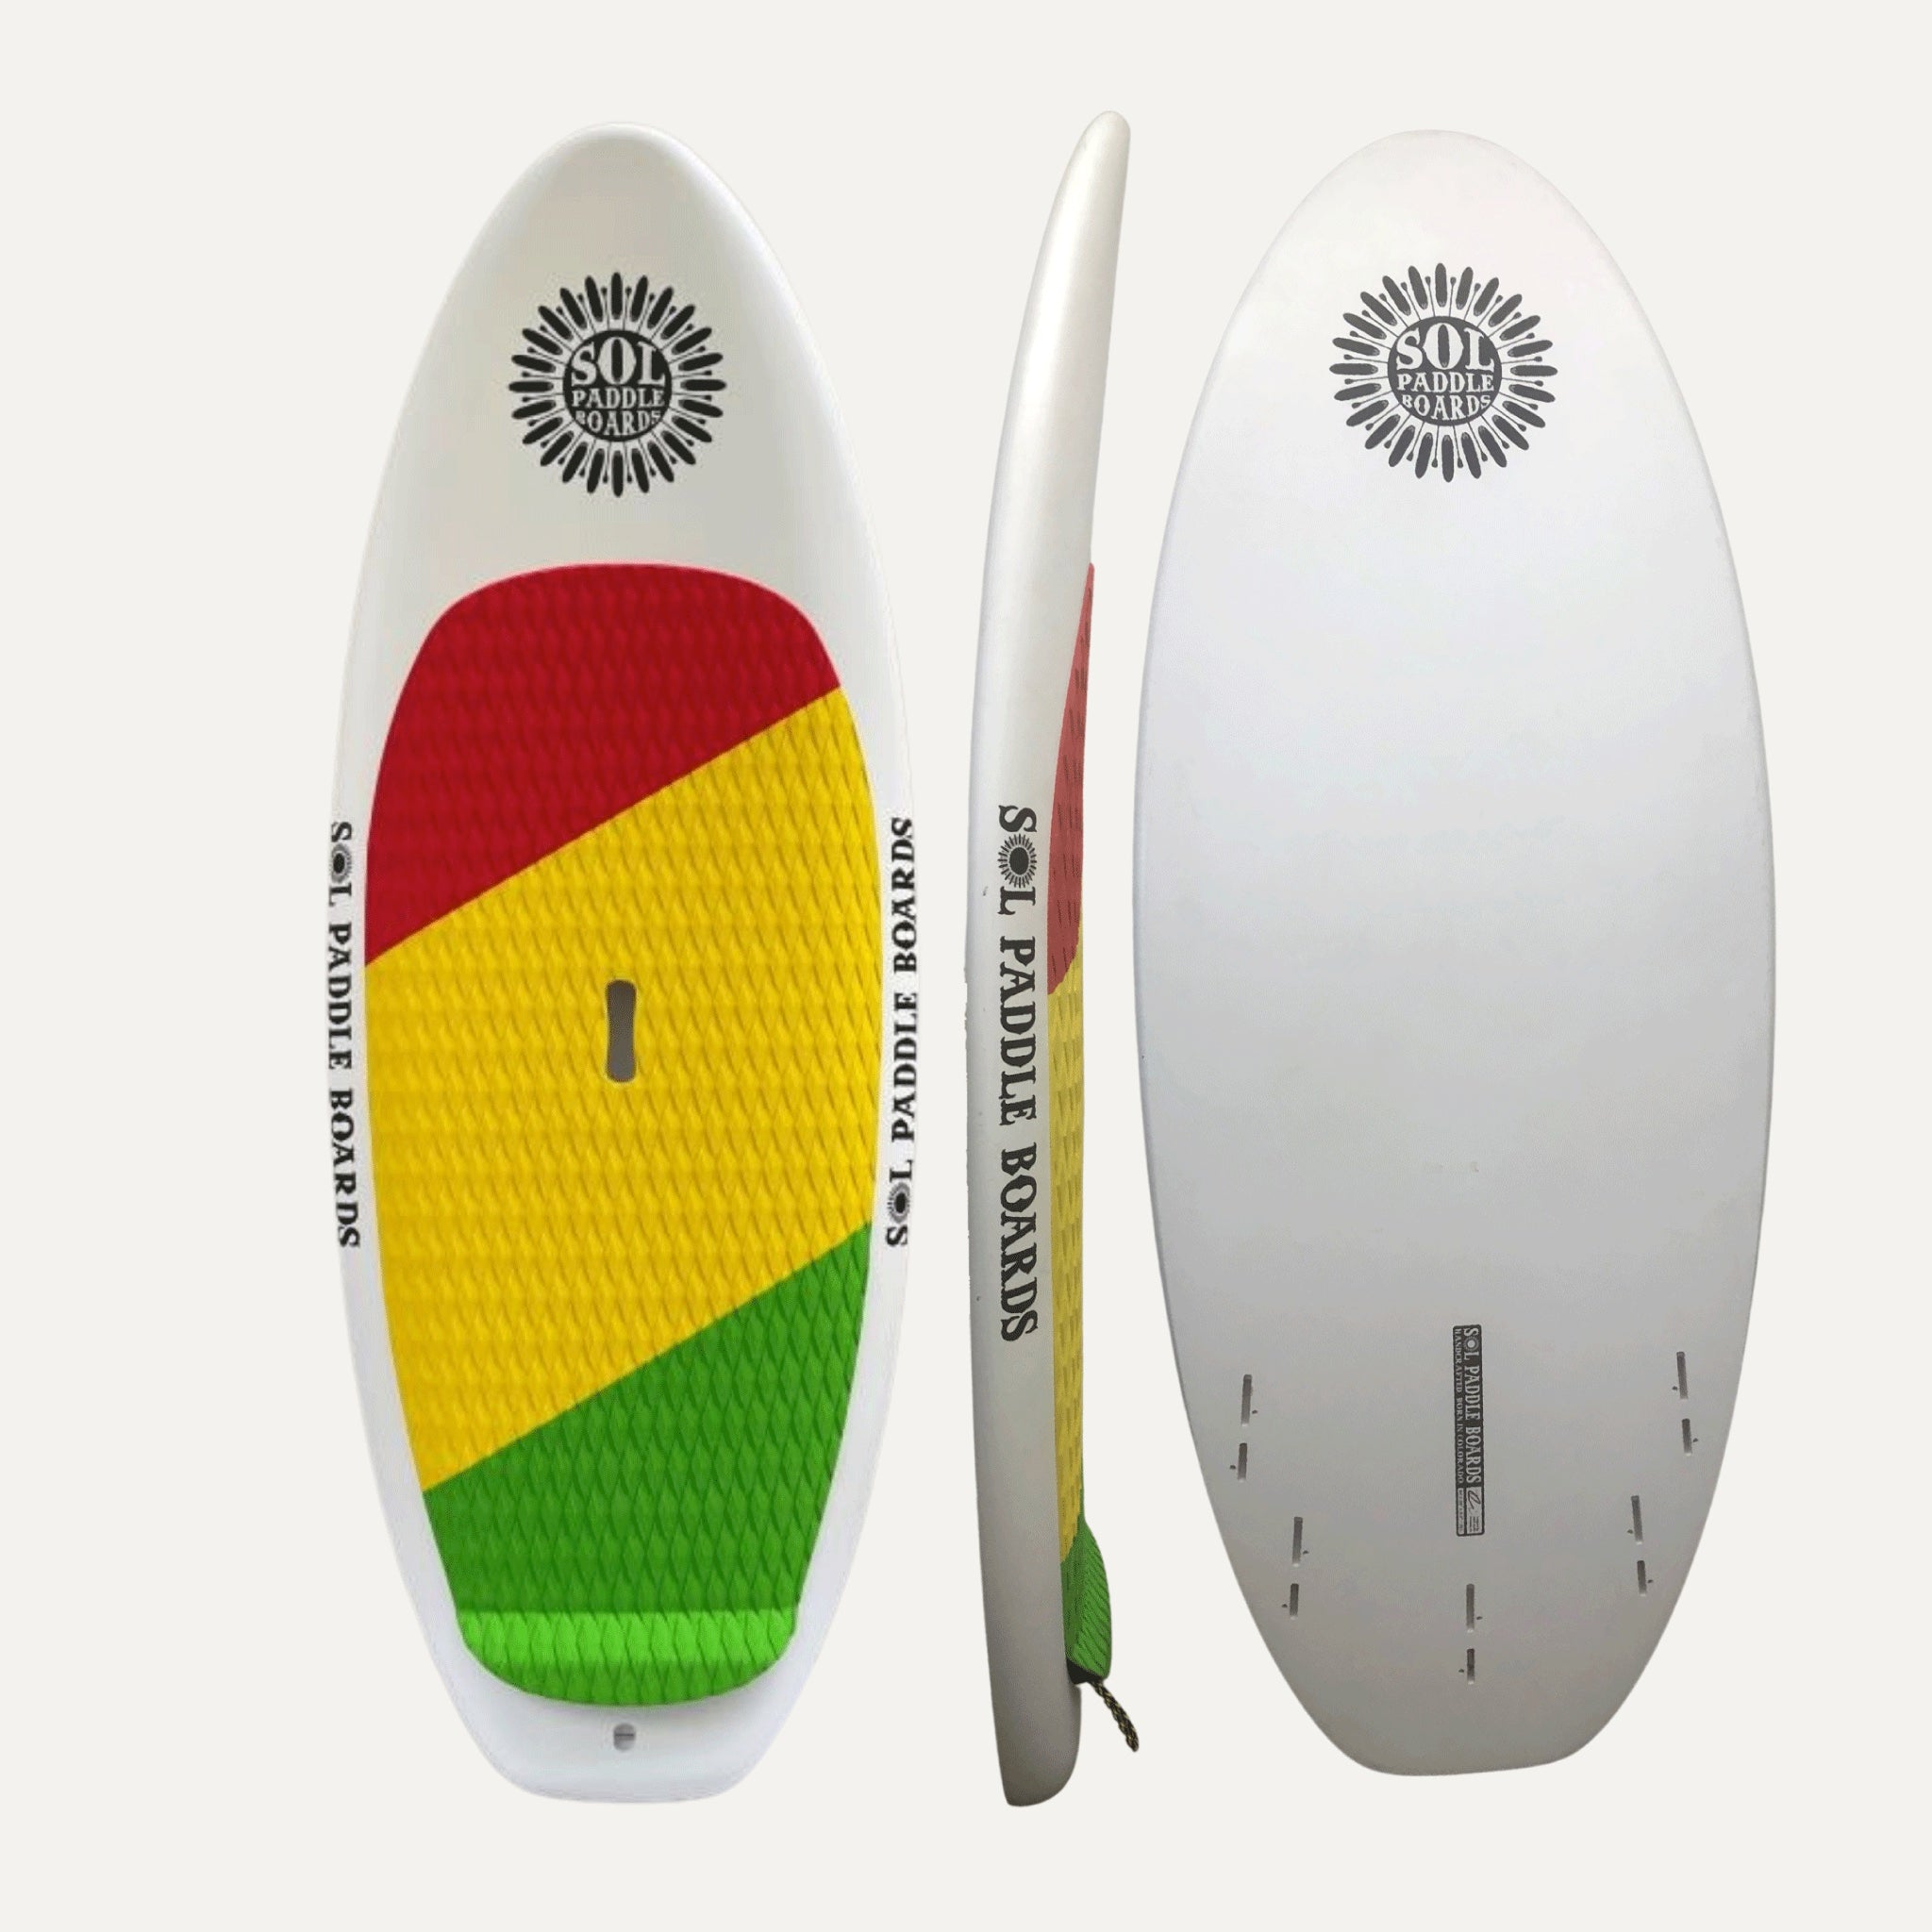 SOLscepter Epoxy Prone River Surfboard showcasing three sides of the river surfboard